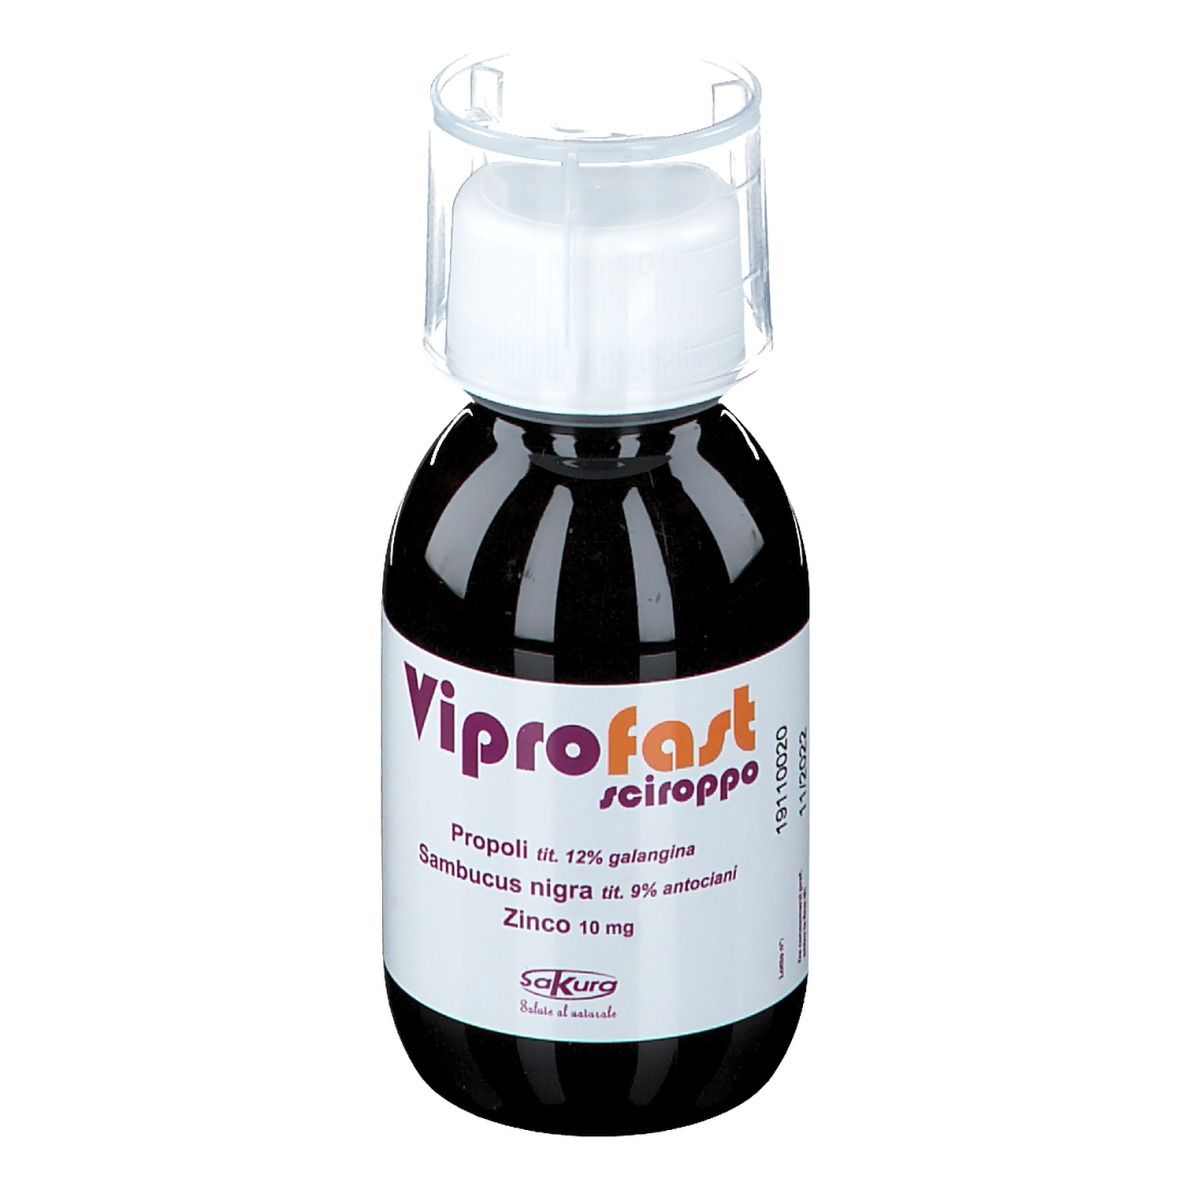 Image of Viprofast Sciroppo